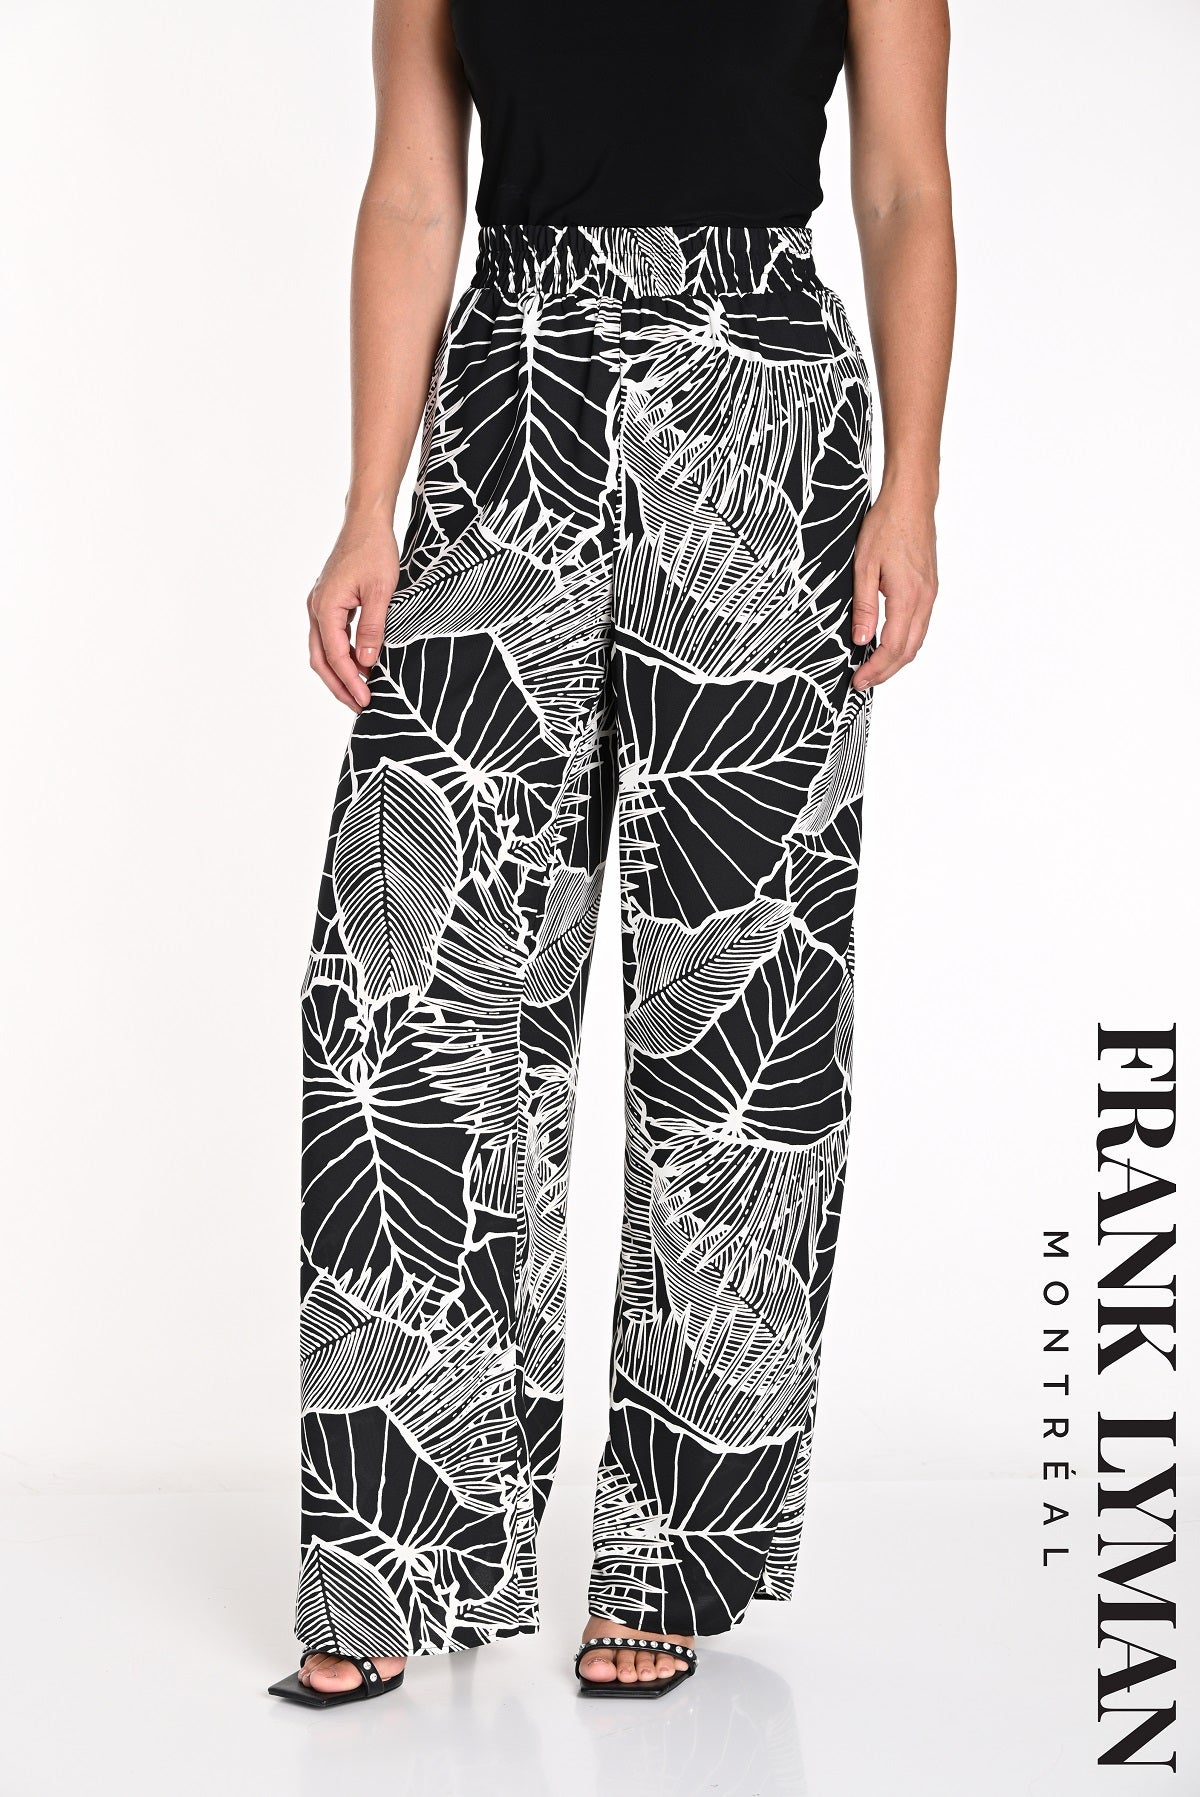 Frank Lyman Montreal Black Beige Print Palazzo Pant With Pull On Waistband